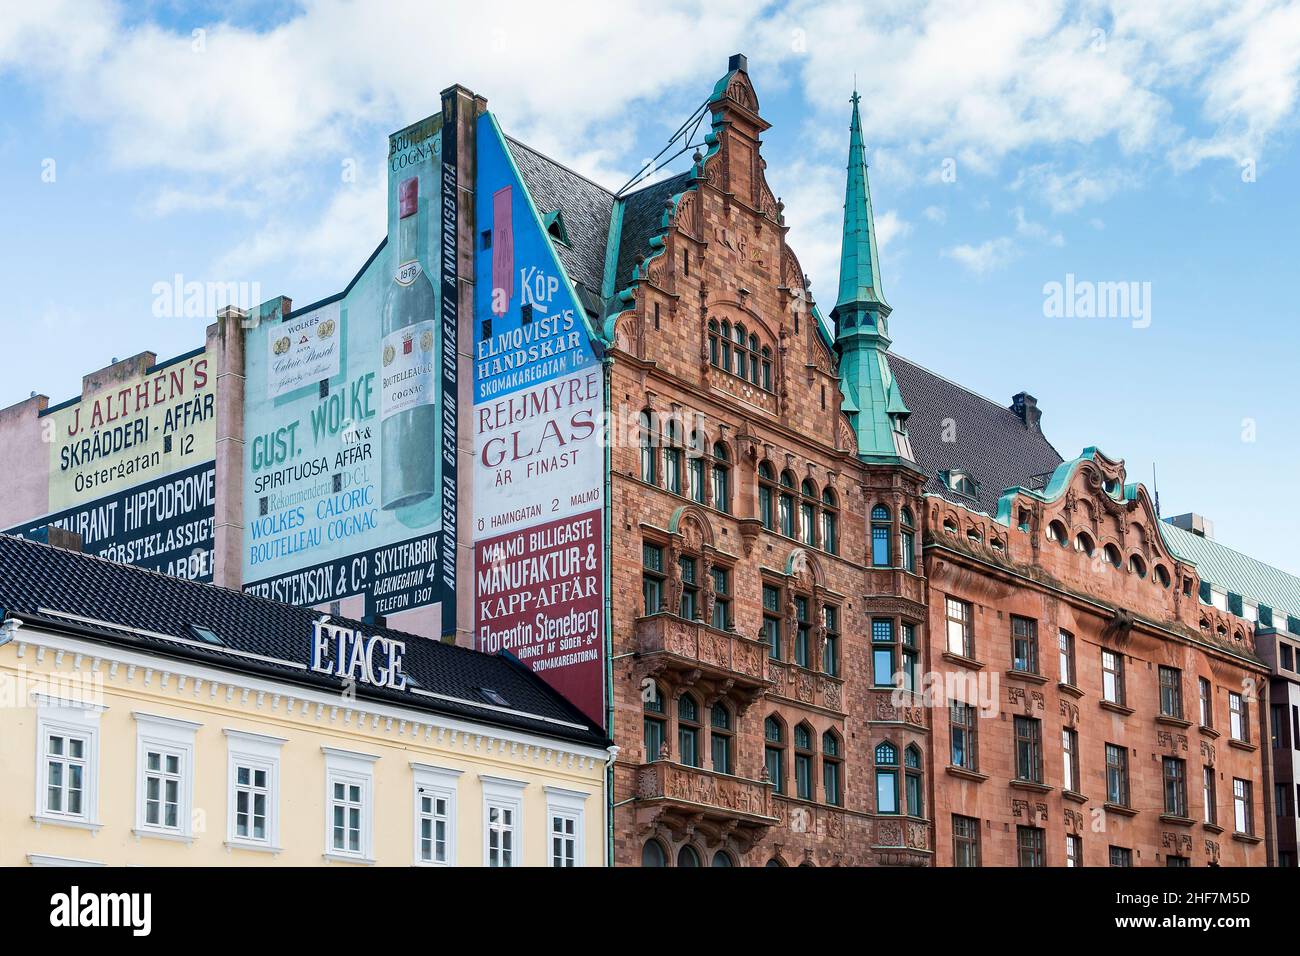 Sweden,  Malmo,  old town,  Stortorget,  facade,  advertising Stock Photo